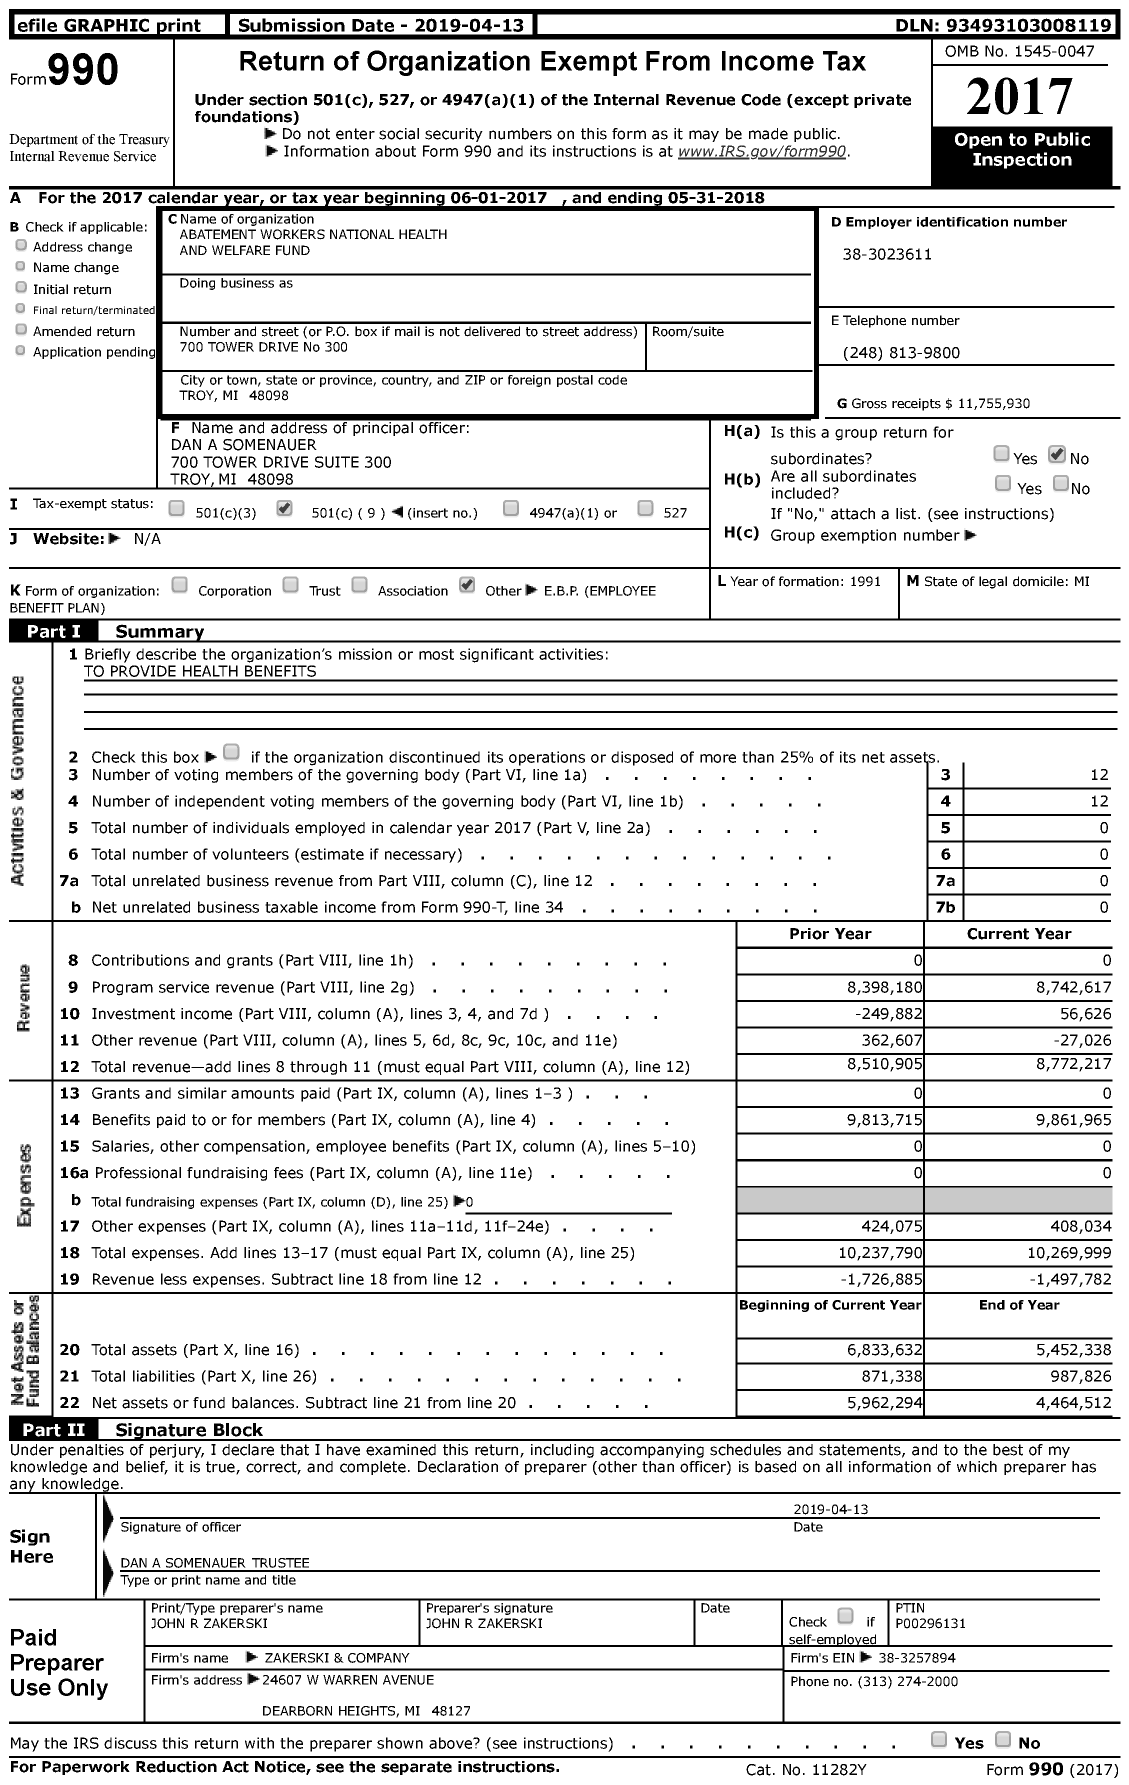 Image of first page of 2017 Form 990 for Abatement Workers National Health and Welfare Fund